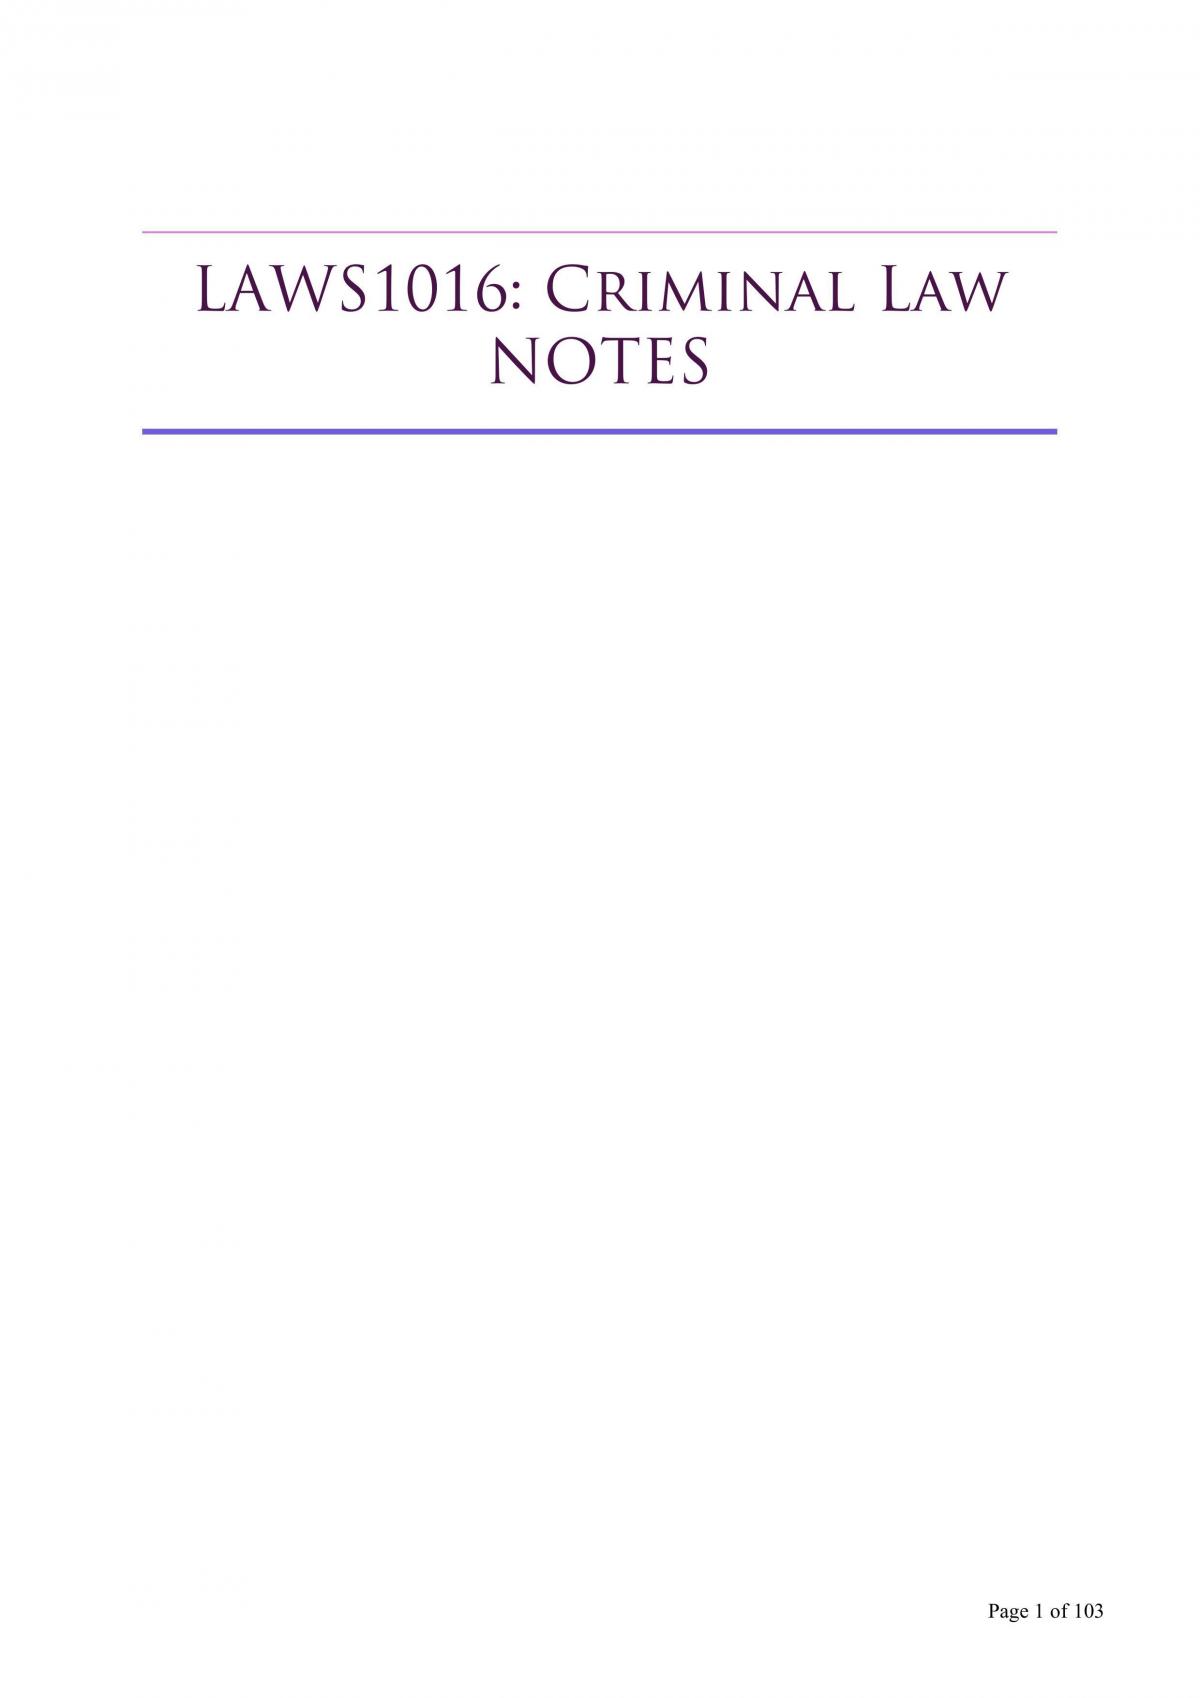 LAWS1016 Exam-Ready Notes - Page 1